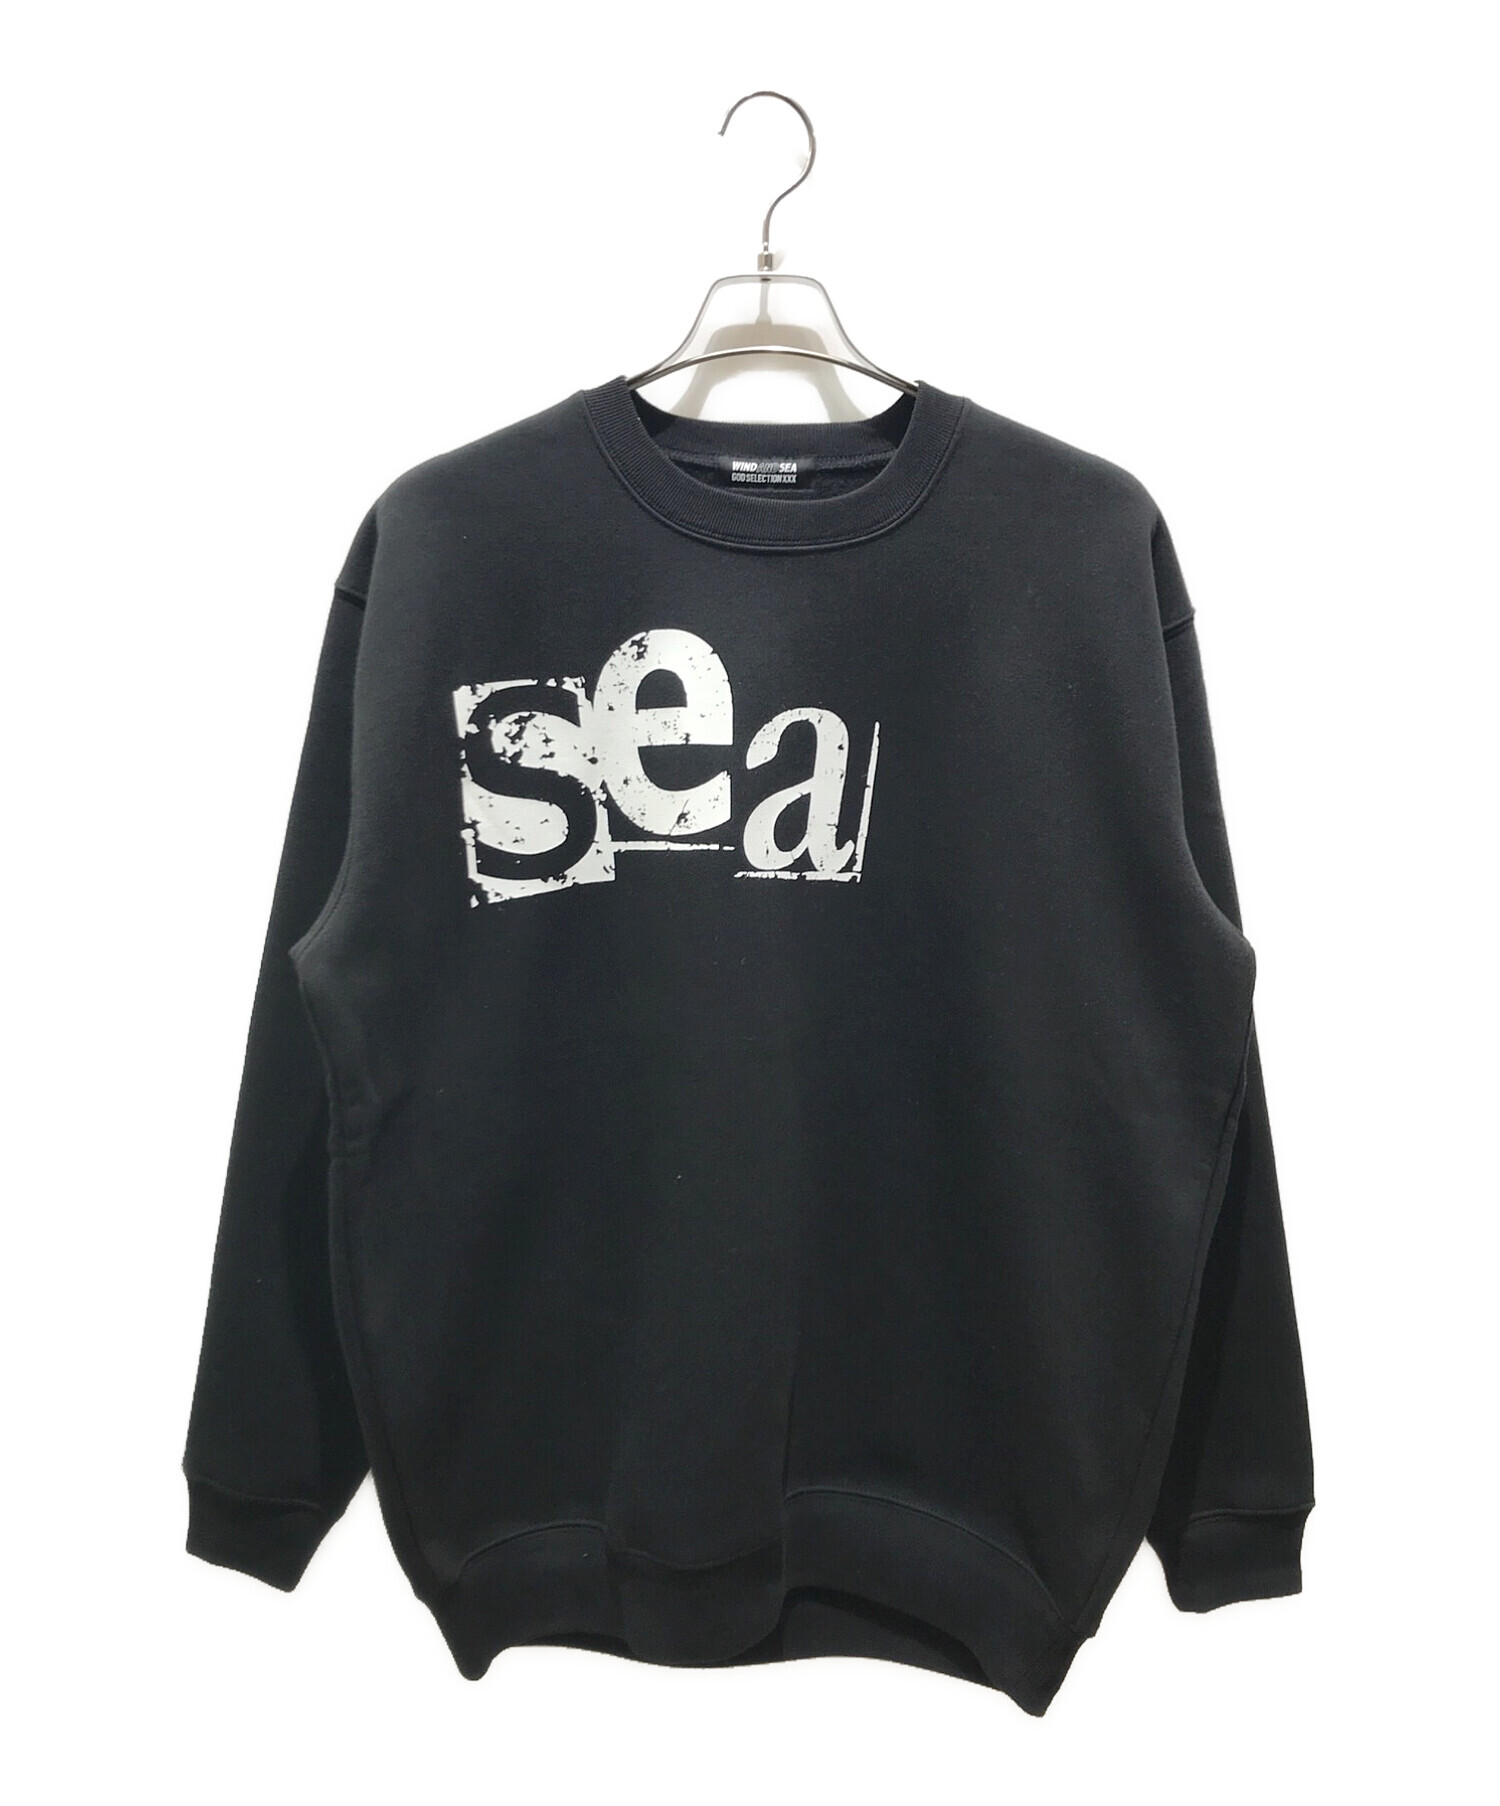 WIND AND SEA × GOD SELECTION XXX クルーネック | kensysgas.com